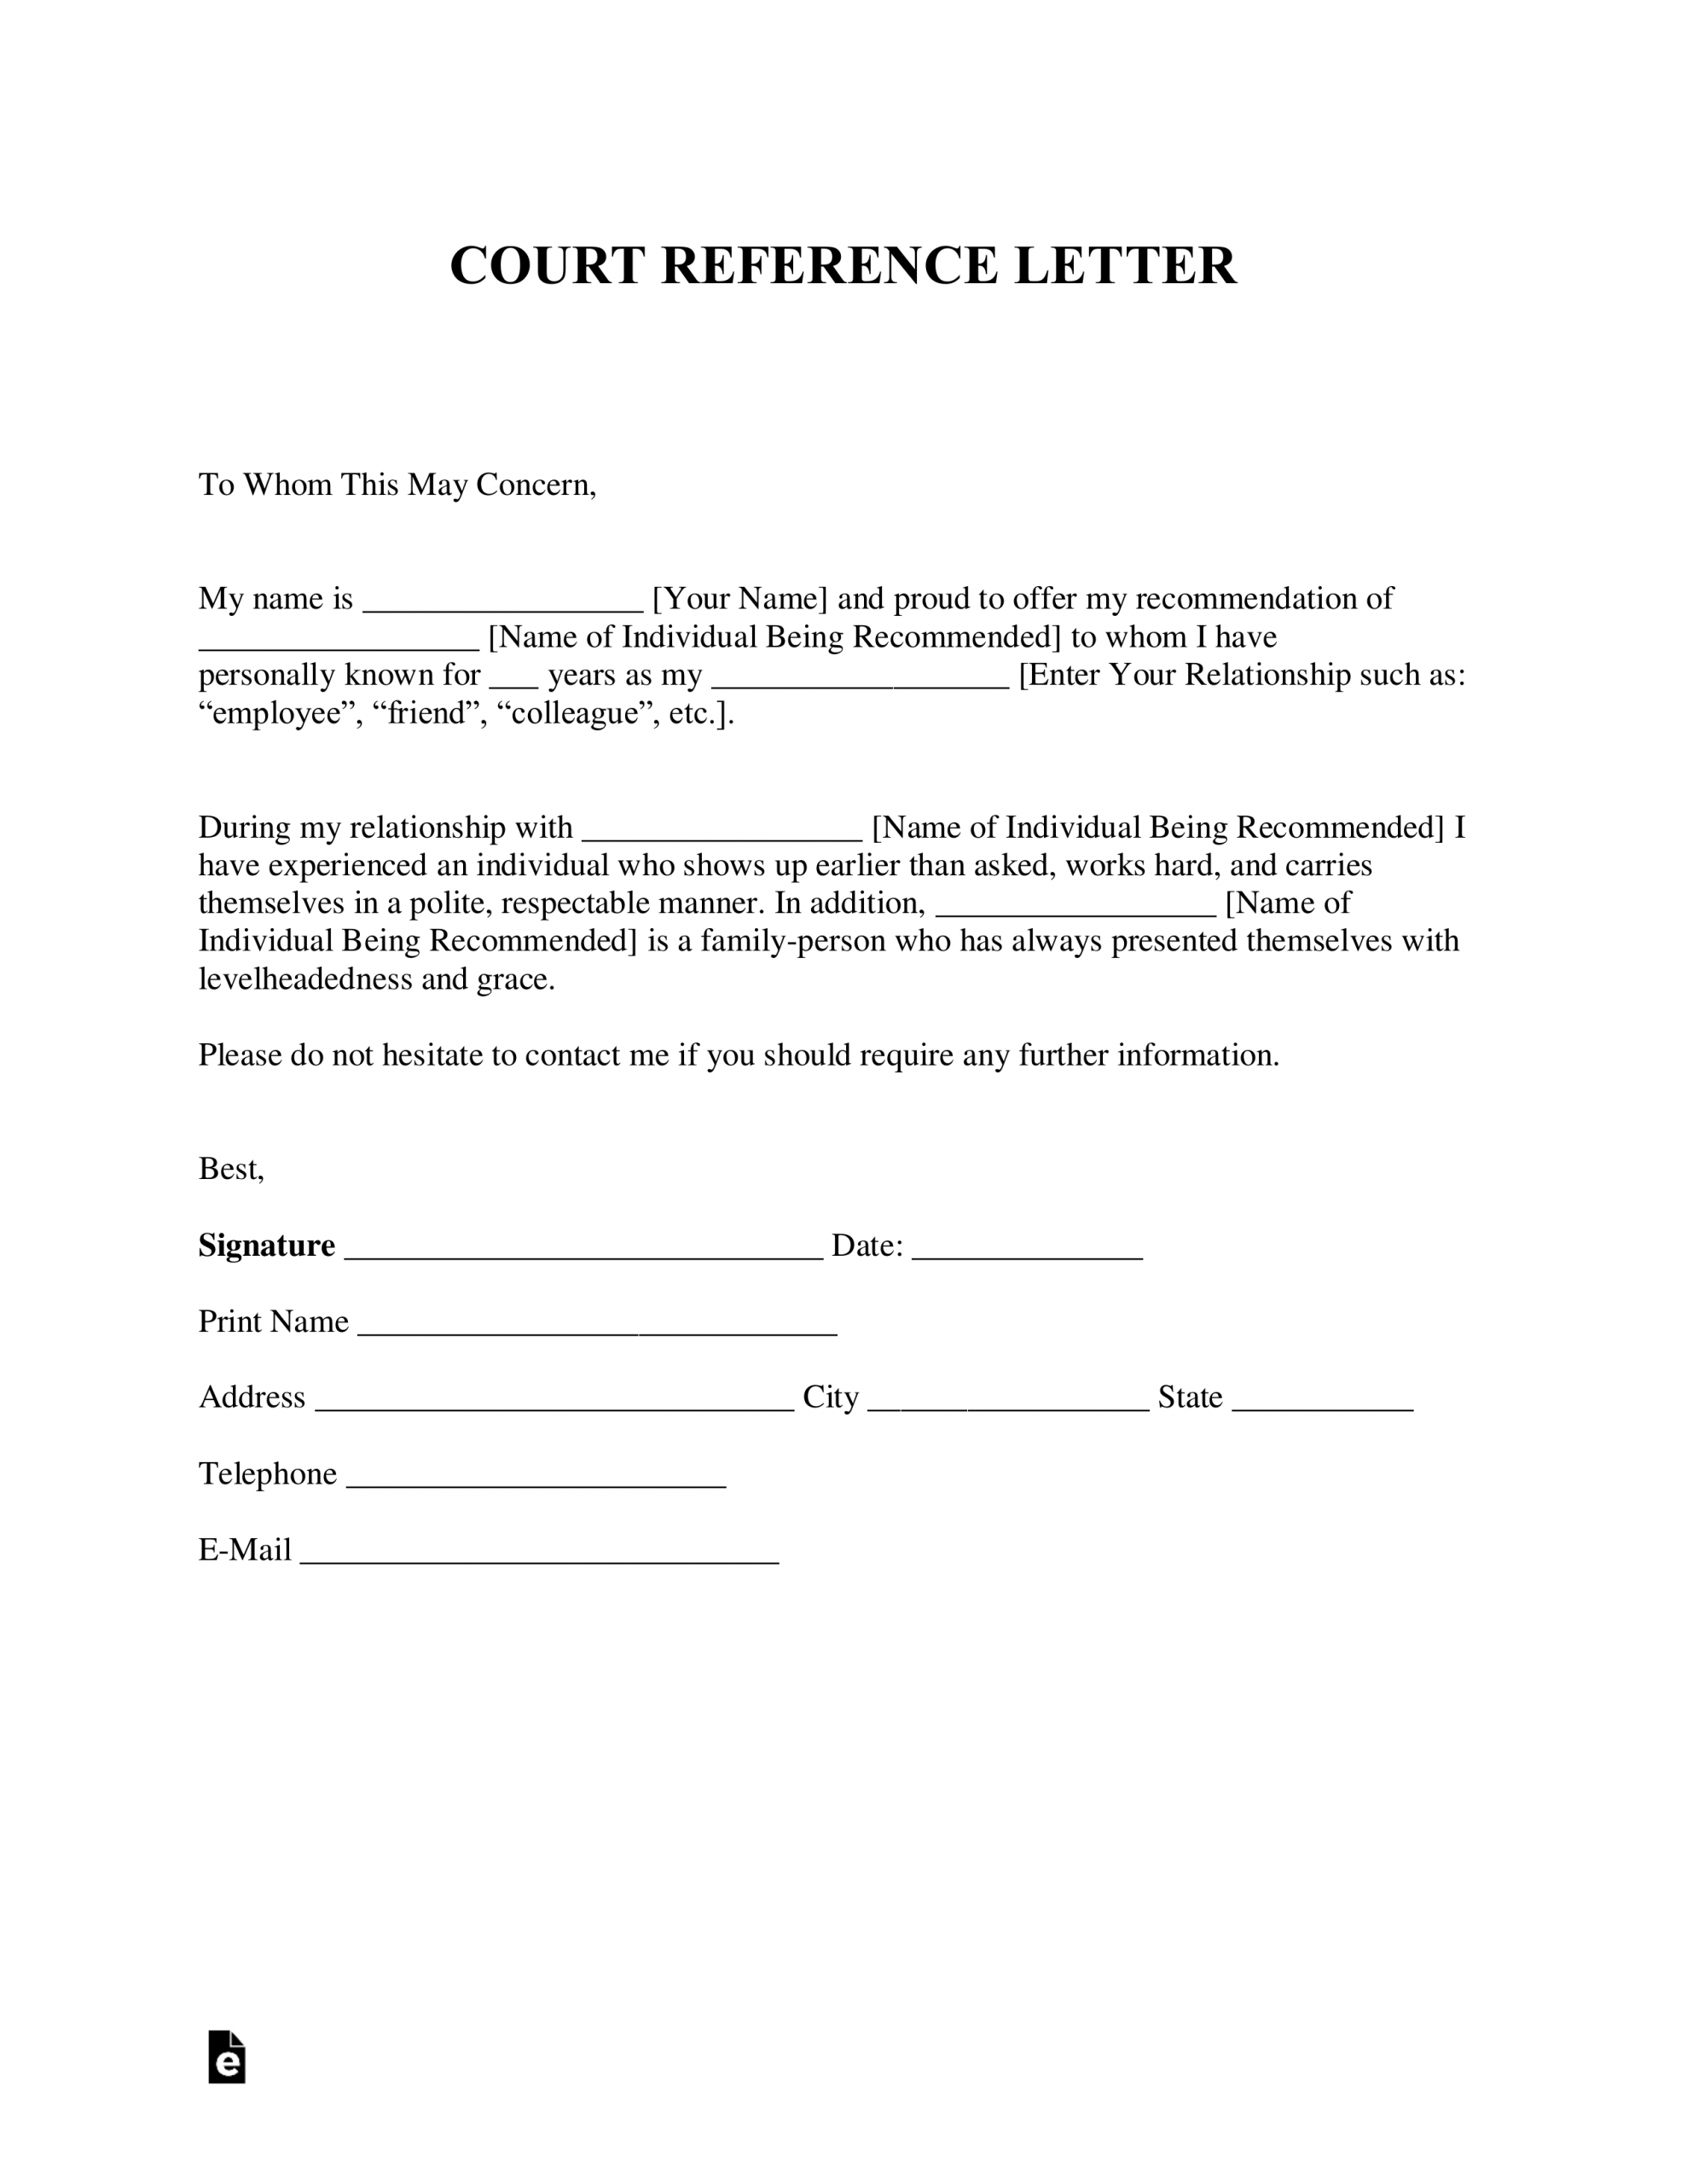 Sample Personal Character Reference Letter For Dui ...